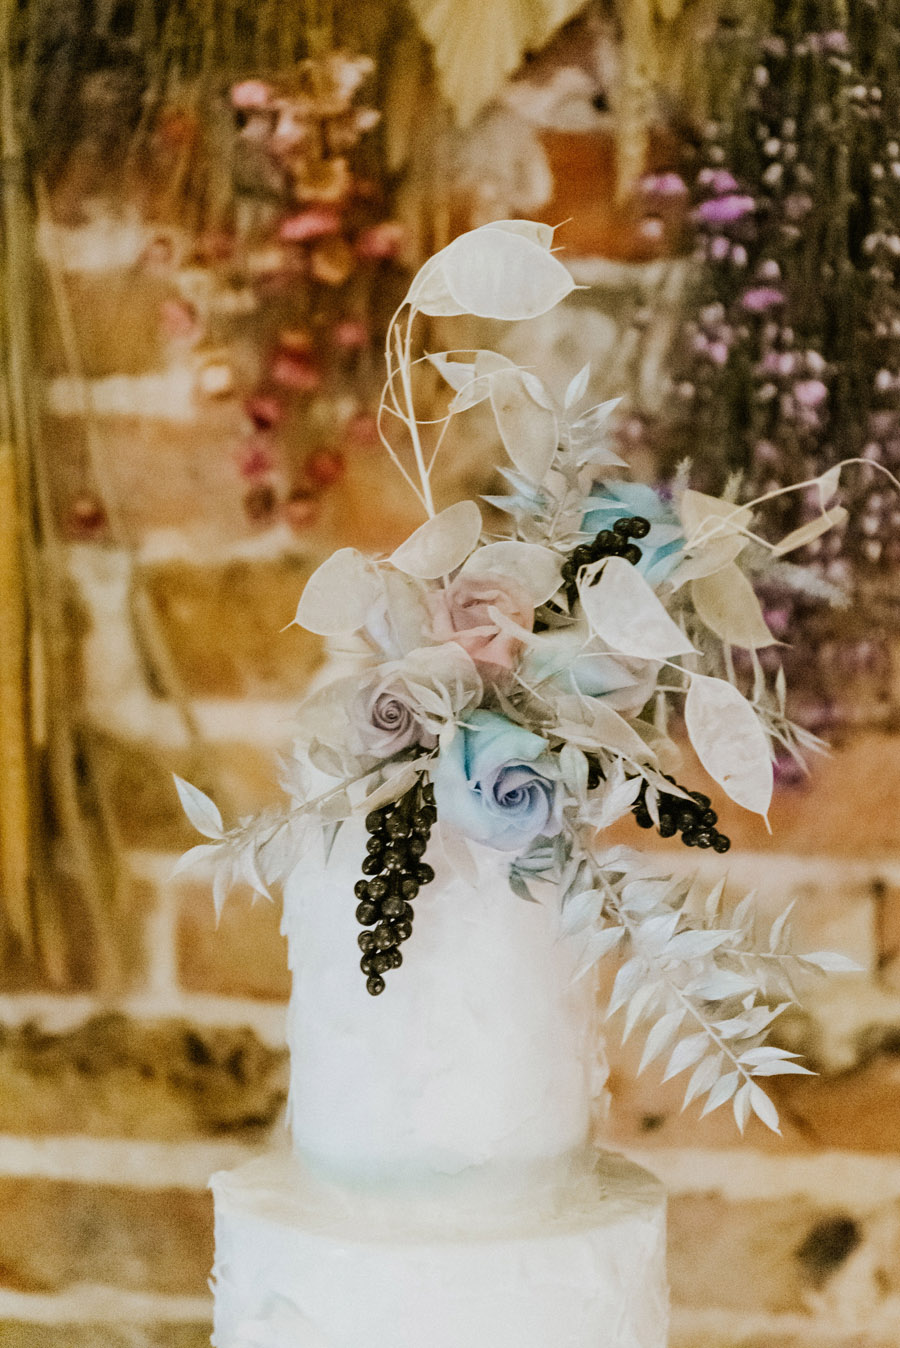 Midelney Manor – Winter pastel romance with a hint of gothic, image credit Hannah Barnes Photography (13)